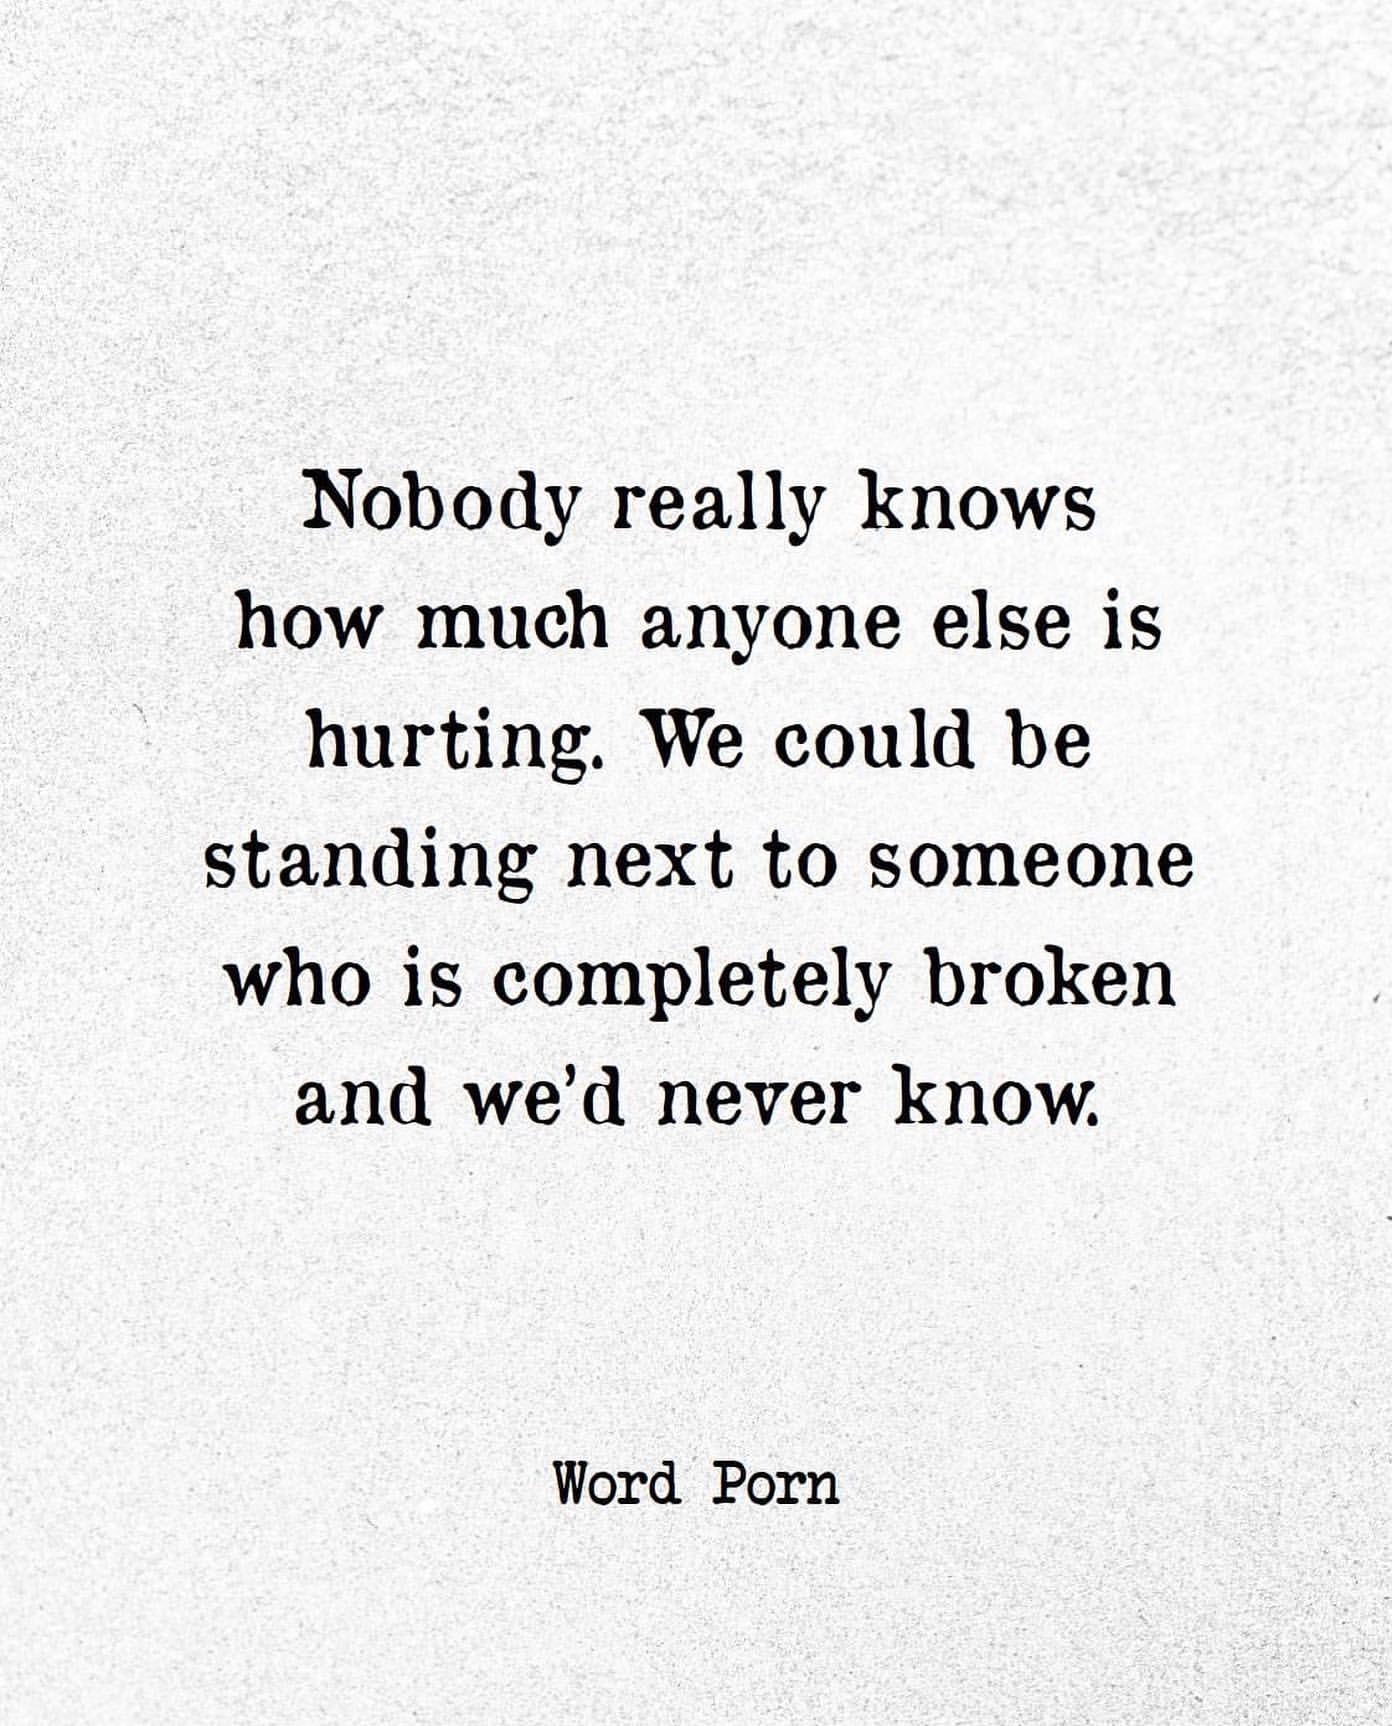 Nobody really knows how much anyone else is hurting. We could be standing next to someone who is completely broken and we'd never know.